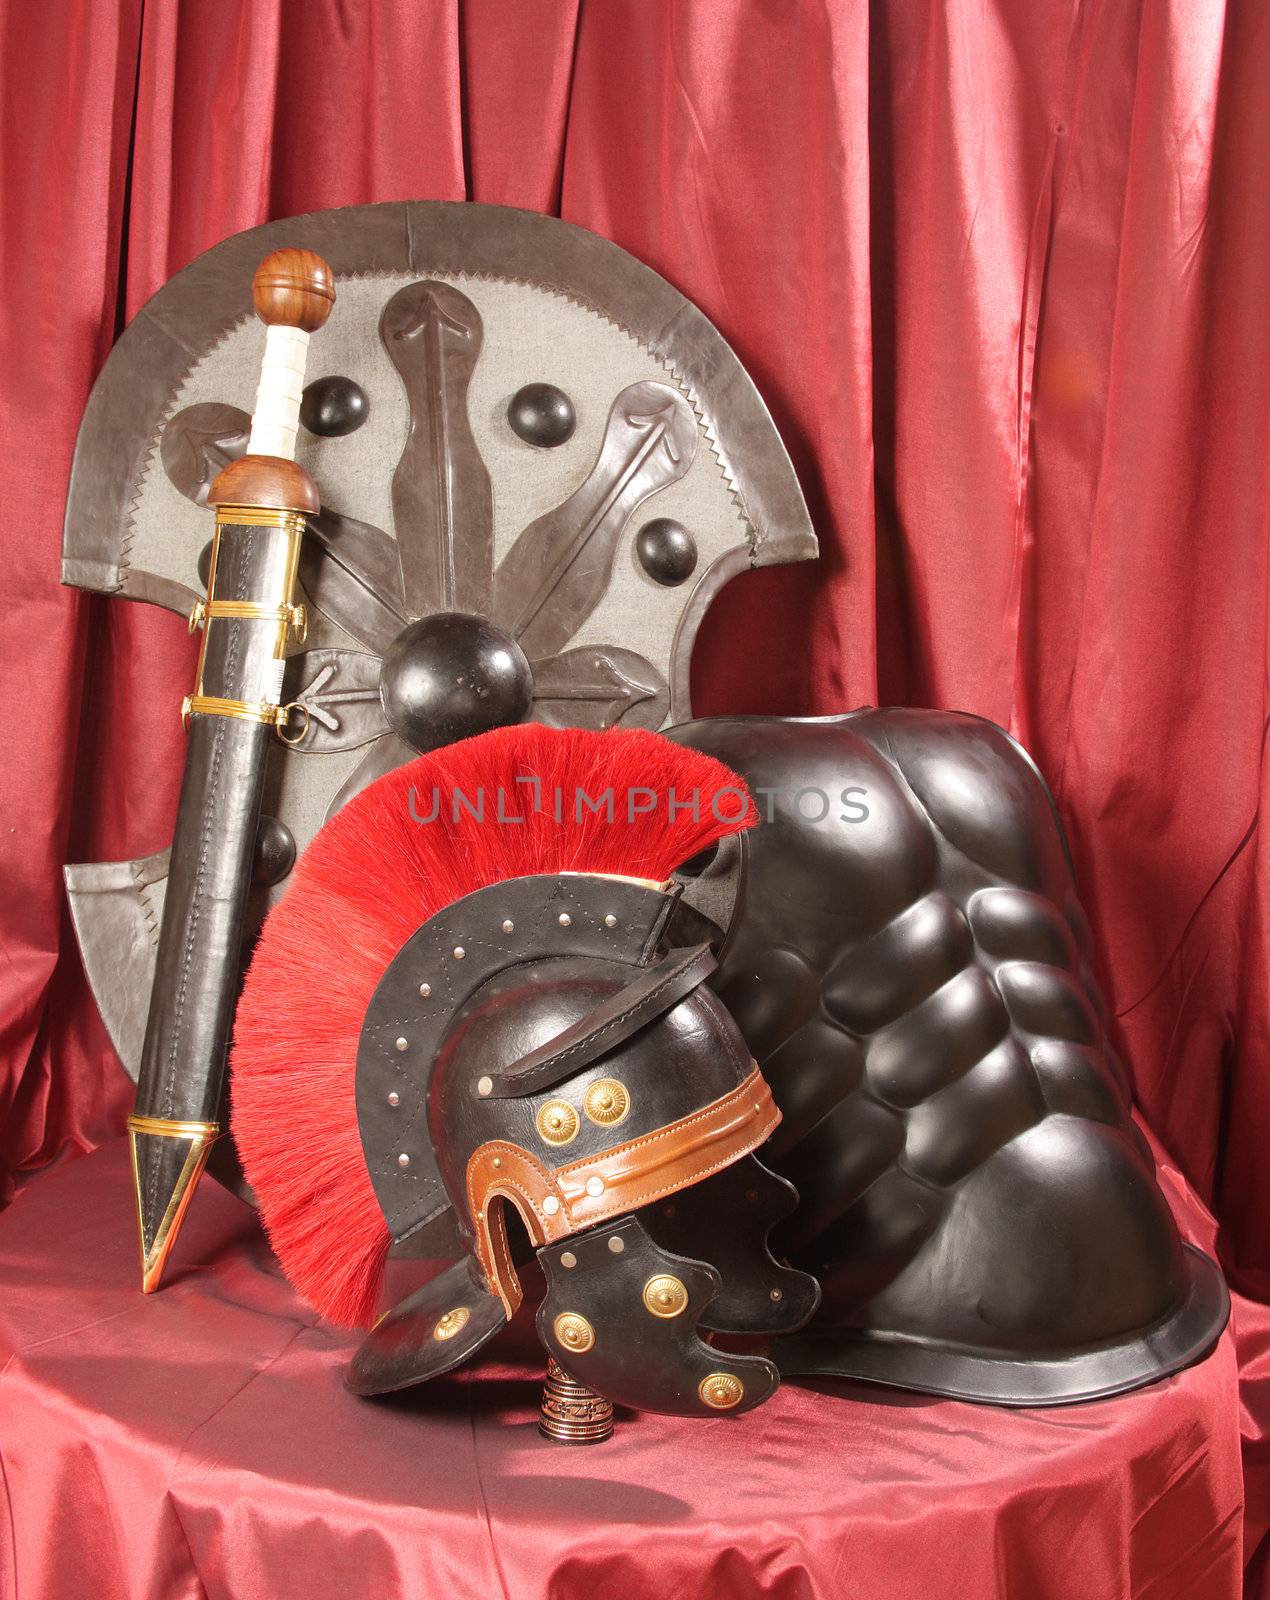 Armour and the weapon of the gladiator